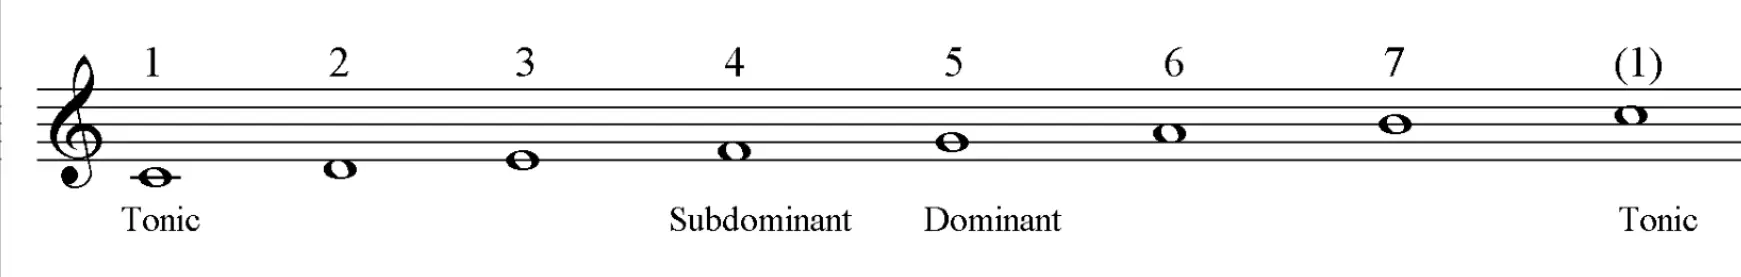 Scale degree names: Tonic, Subdominant and Dominant.